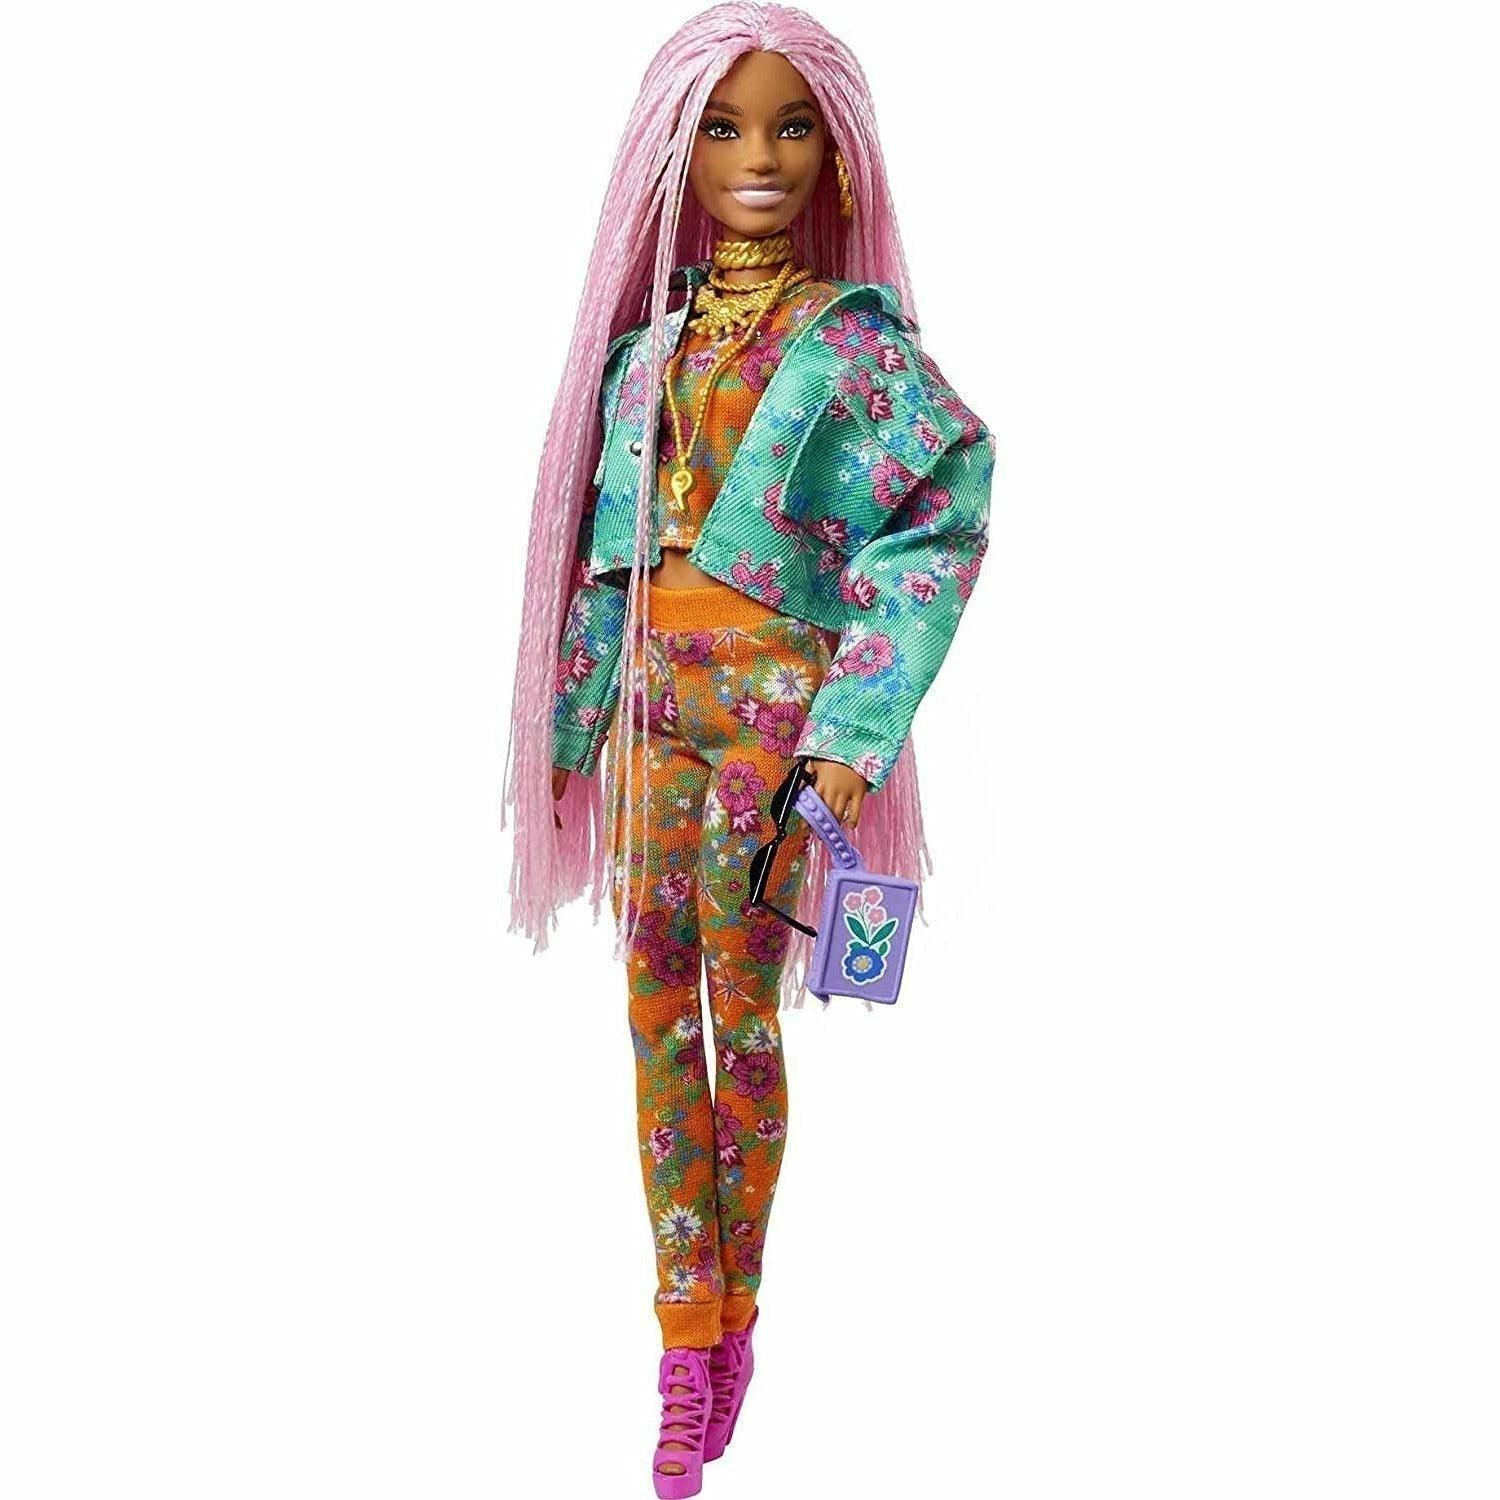 Barbie Extra Doll #10 in Floral-Print Jacket & Jogger Set with DJ Mouse Pet, Extra-Long Pink Braids, Layered Outfit & Accessories - BumbleToys - 5-7 Years, Barbie, Dolls, Fashion Dolls & Accessories, Girls, OXE, Pre-Order